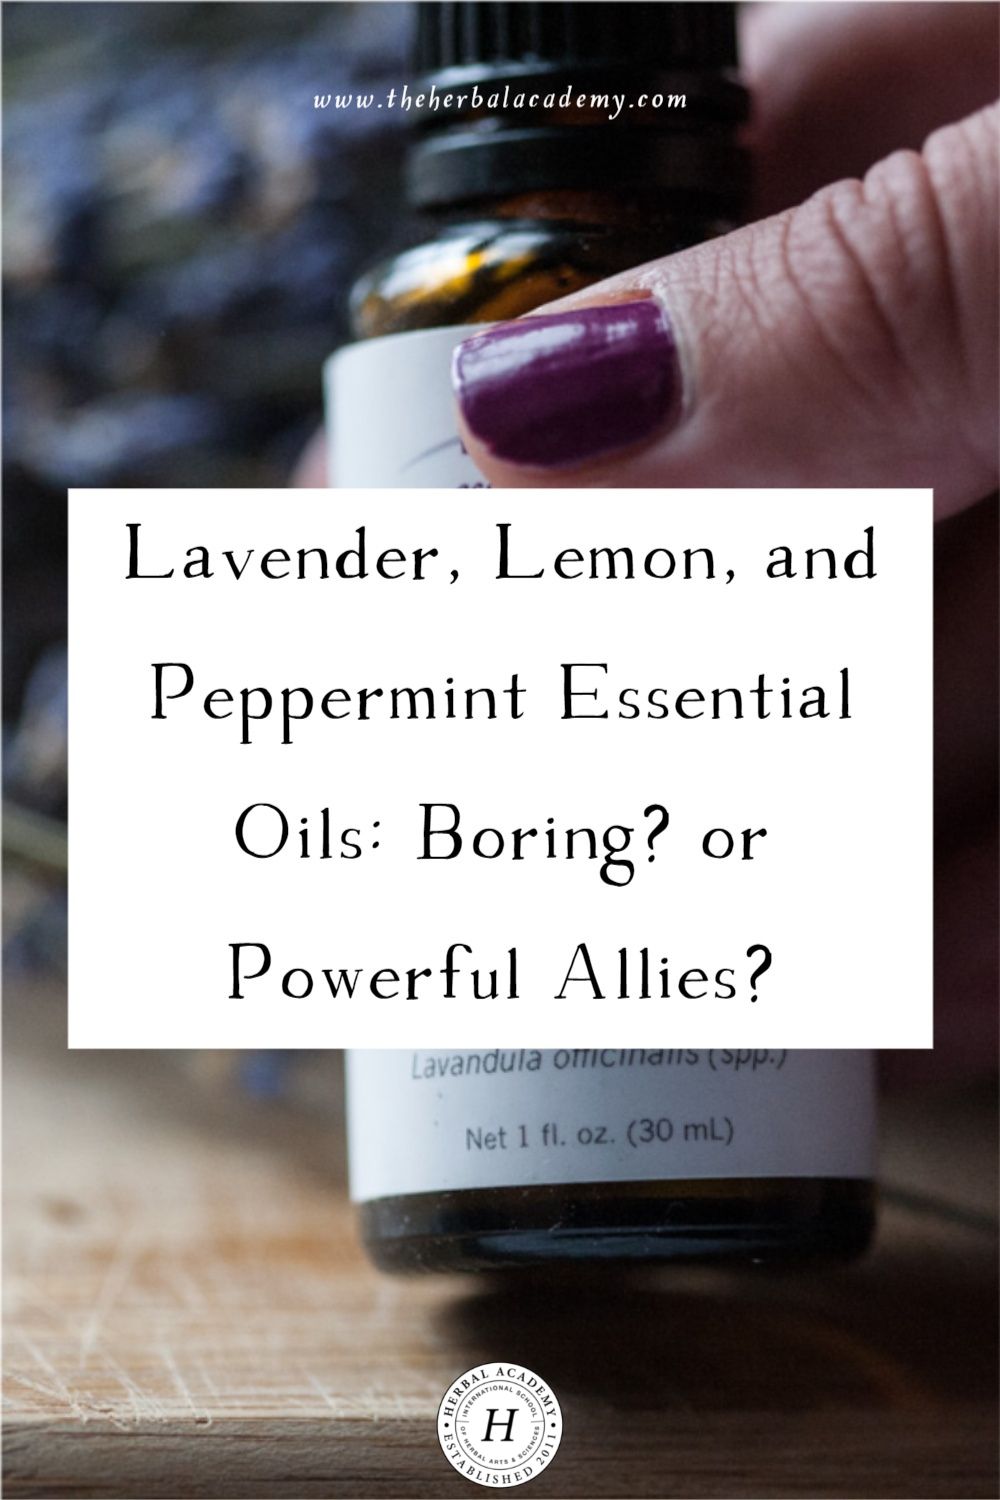 Lavender, Lemon, and Peppermint Essential Oils: Boring? Or Powerful Allies? | Herbal Academy | If you have lavender, lemon, and peppermint essential oils, you can use them alone to address daily concerns with your family and friends.